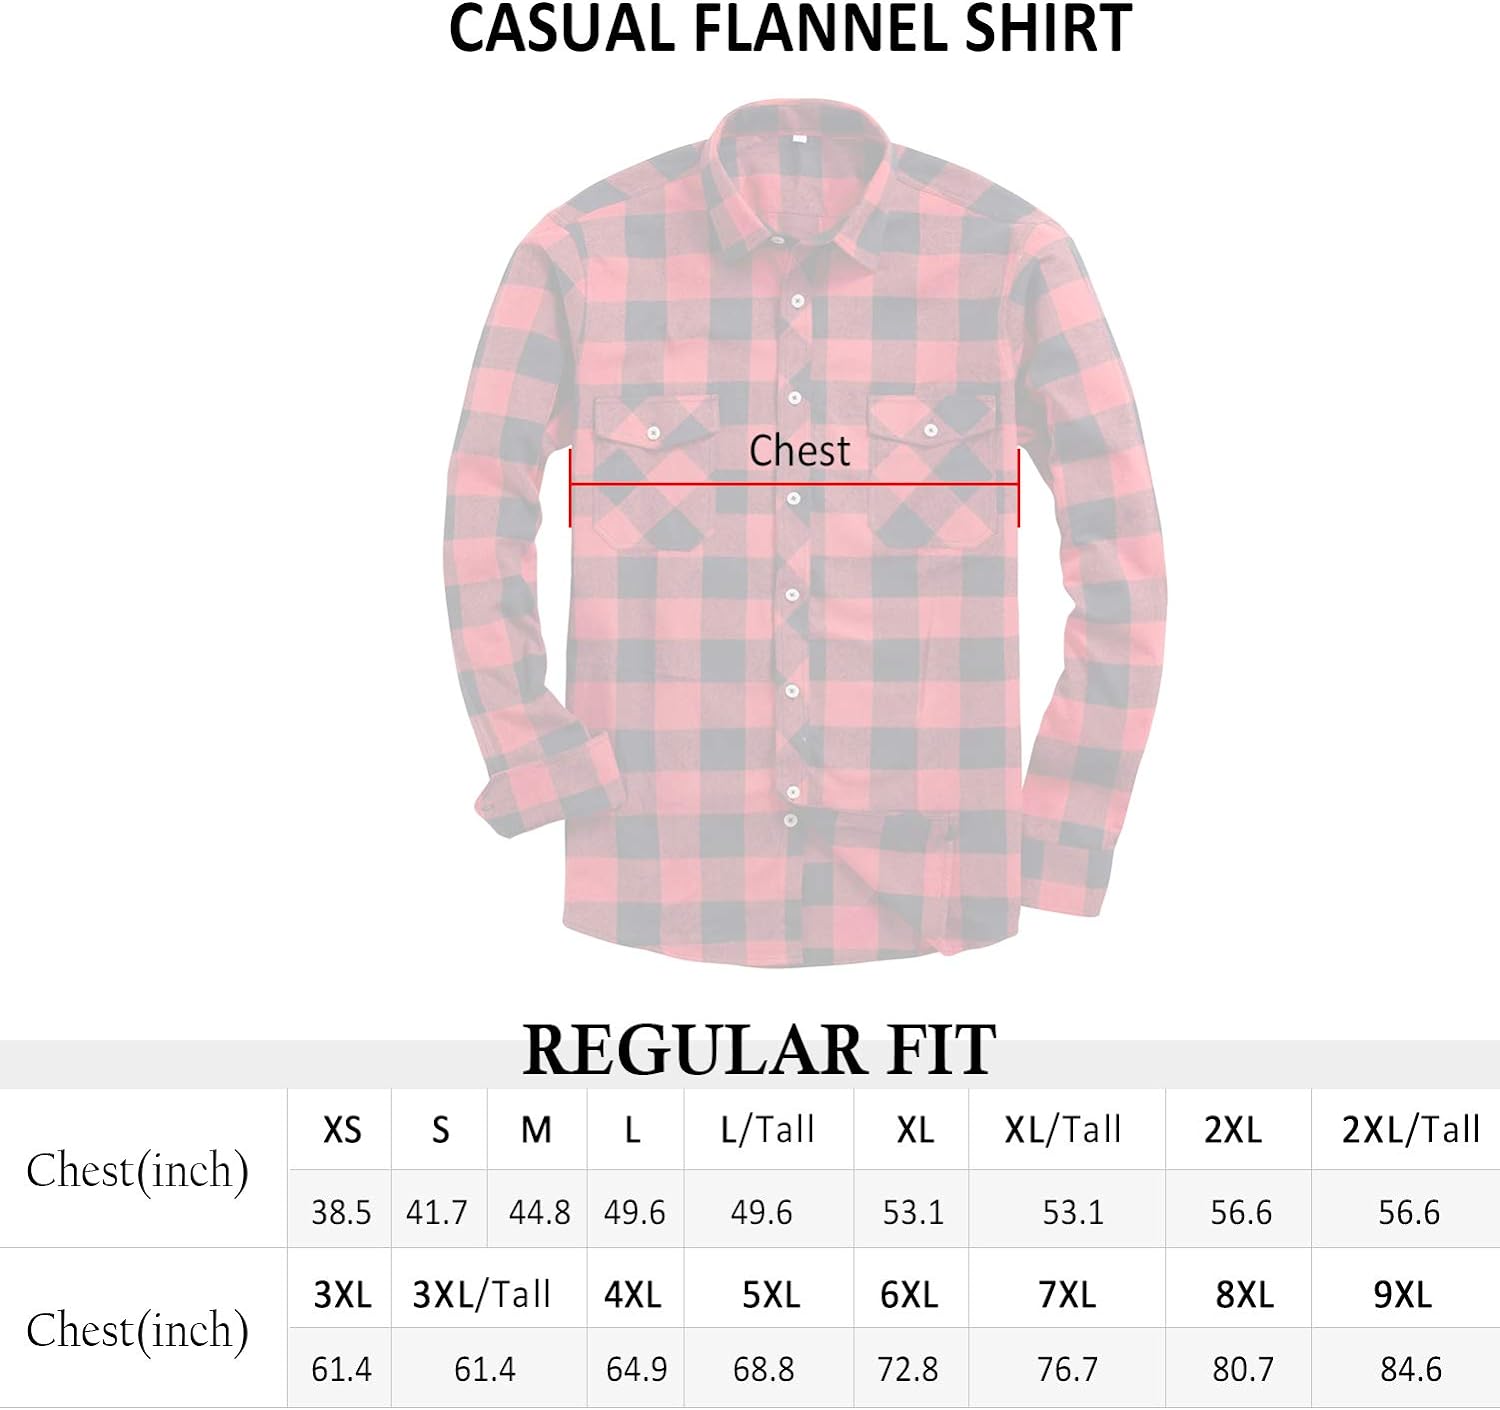 Alimens & Gentle Men's Button Down Regular Fit Long Sleeve Plaid Flannel Casual Shirts